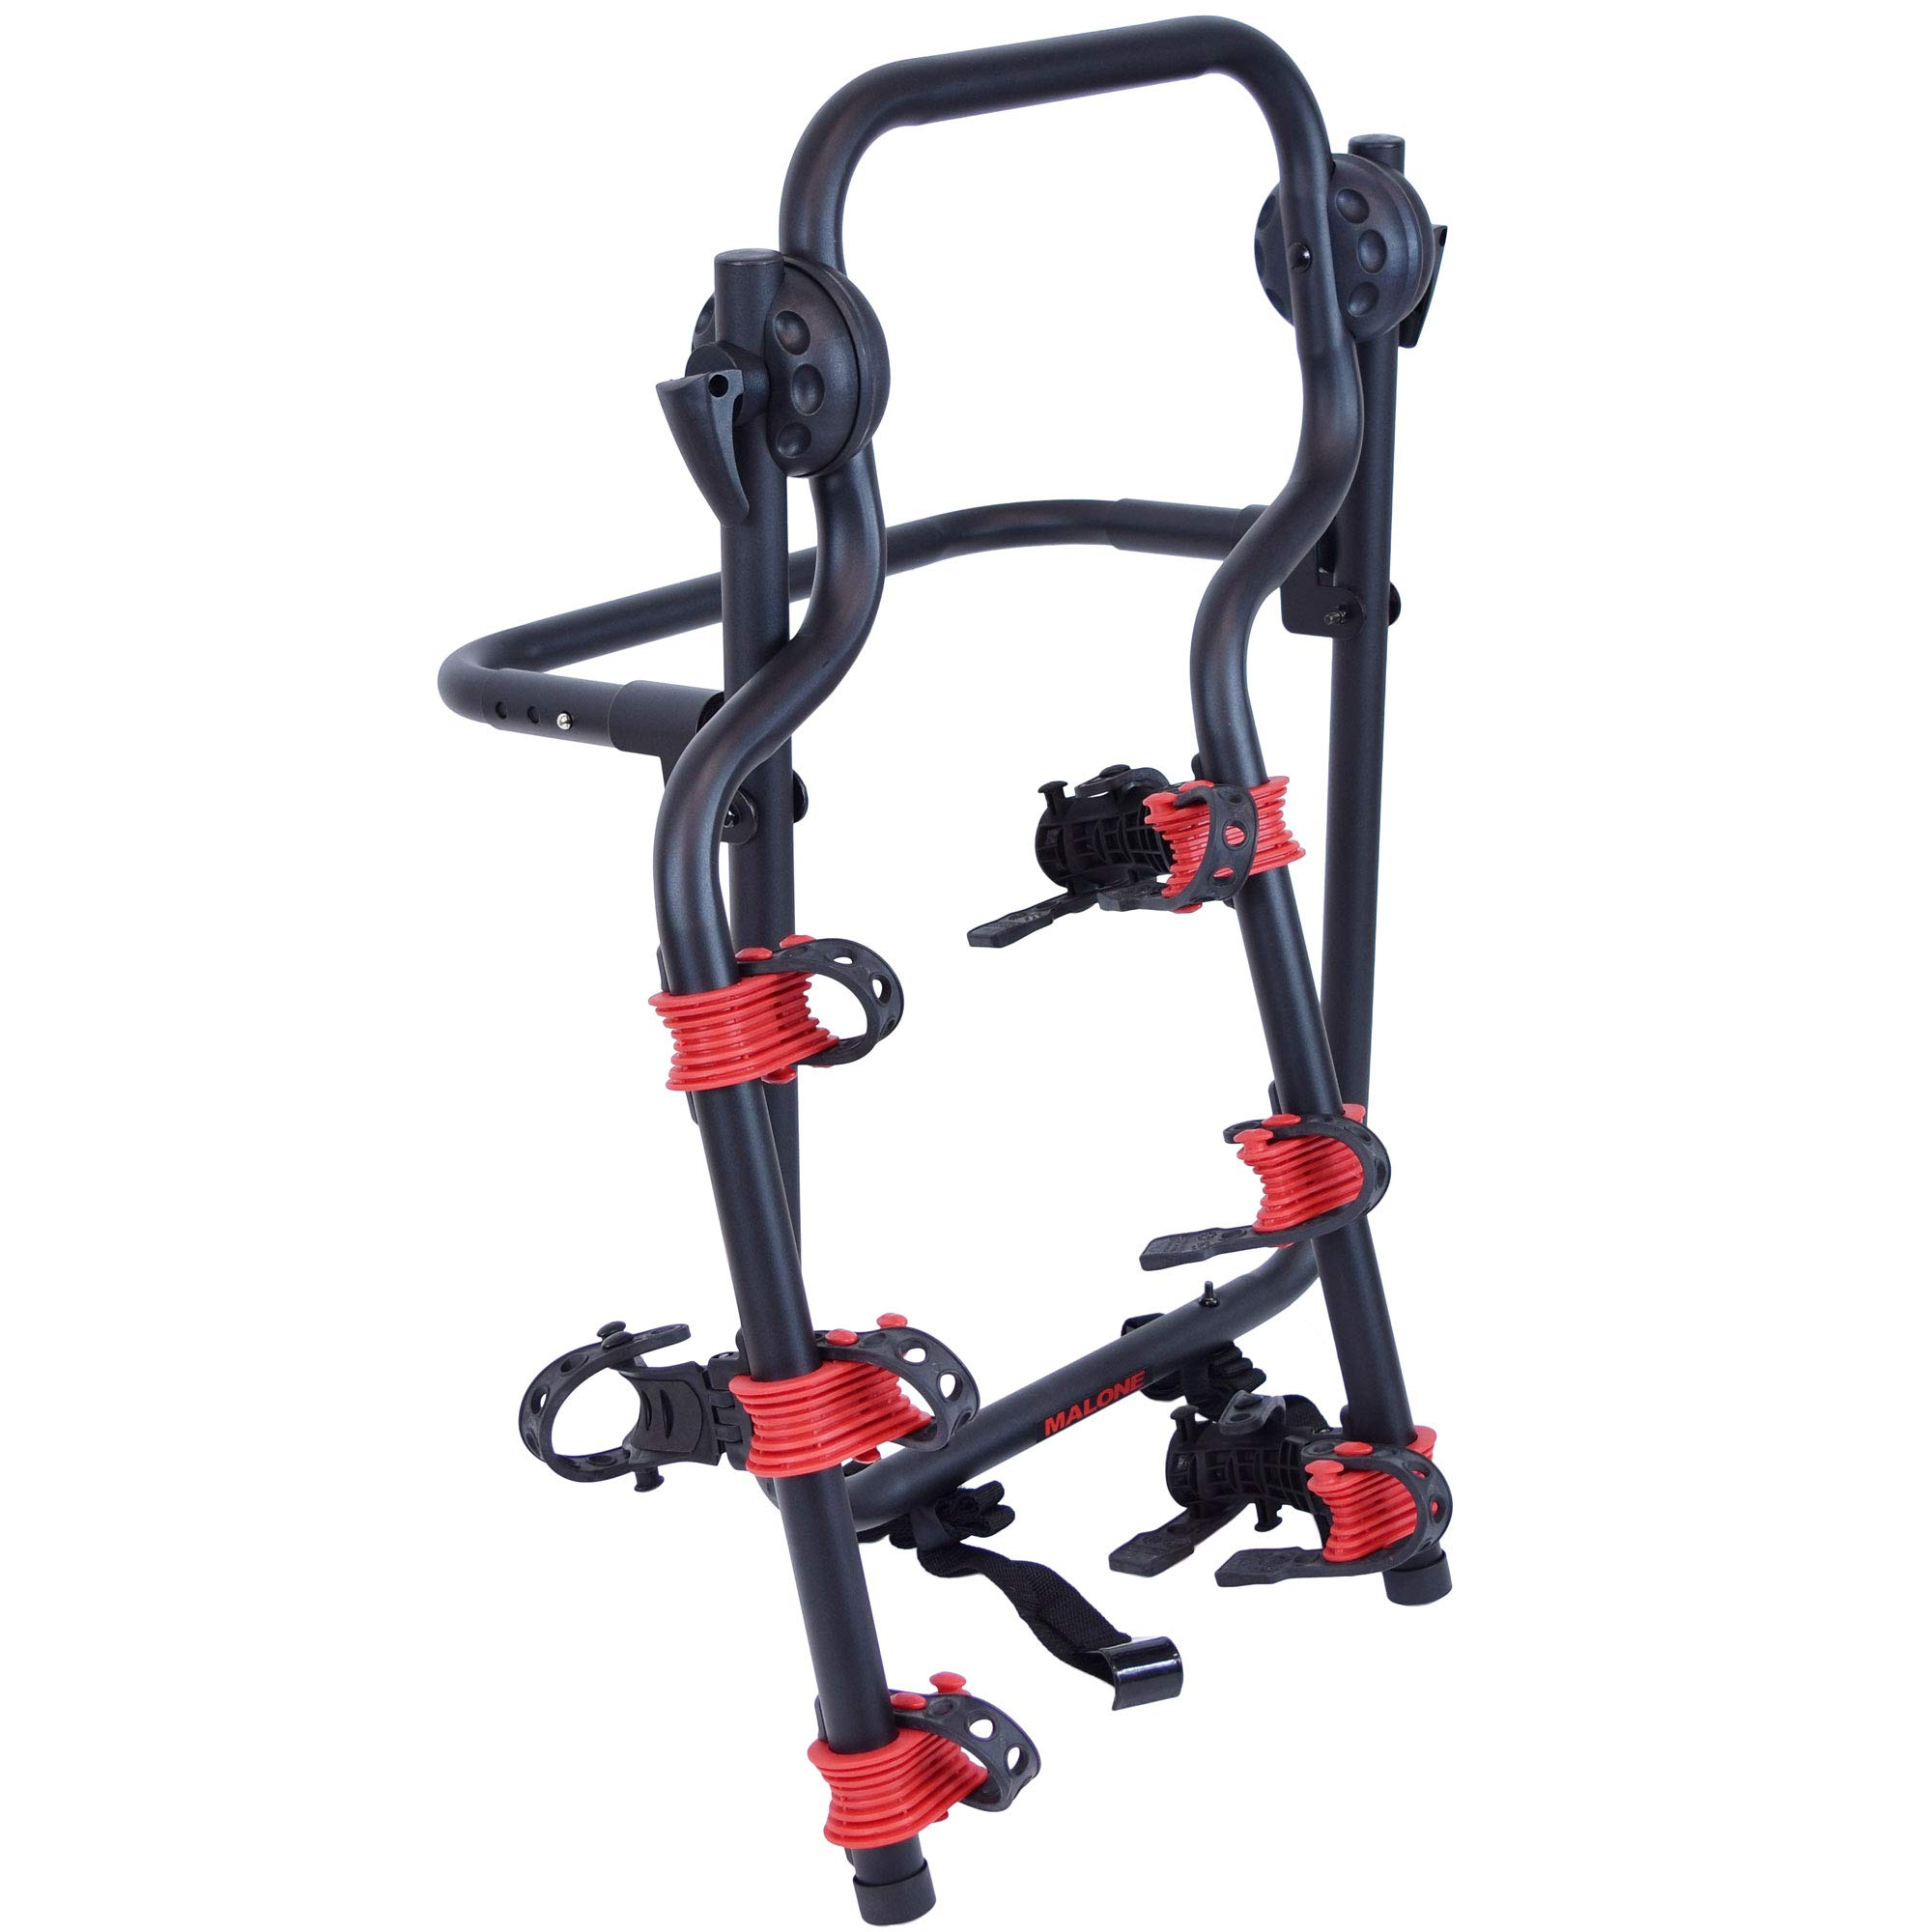 Malone Hanger Spare Tire OS 3-Bike Carrier